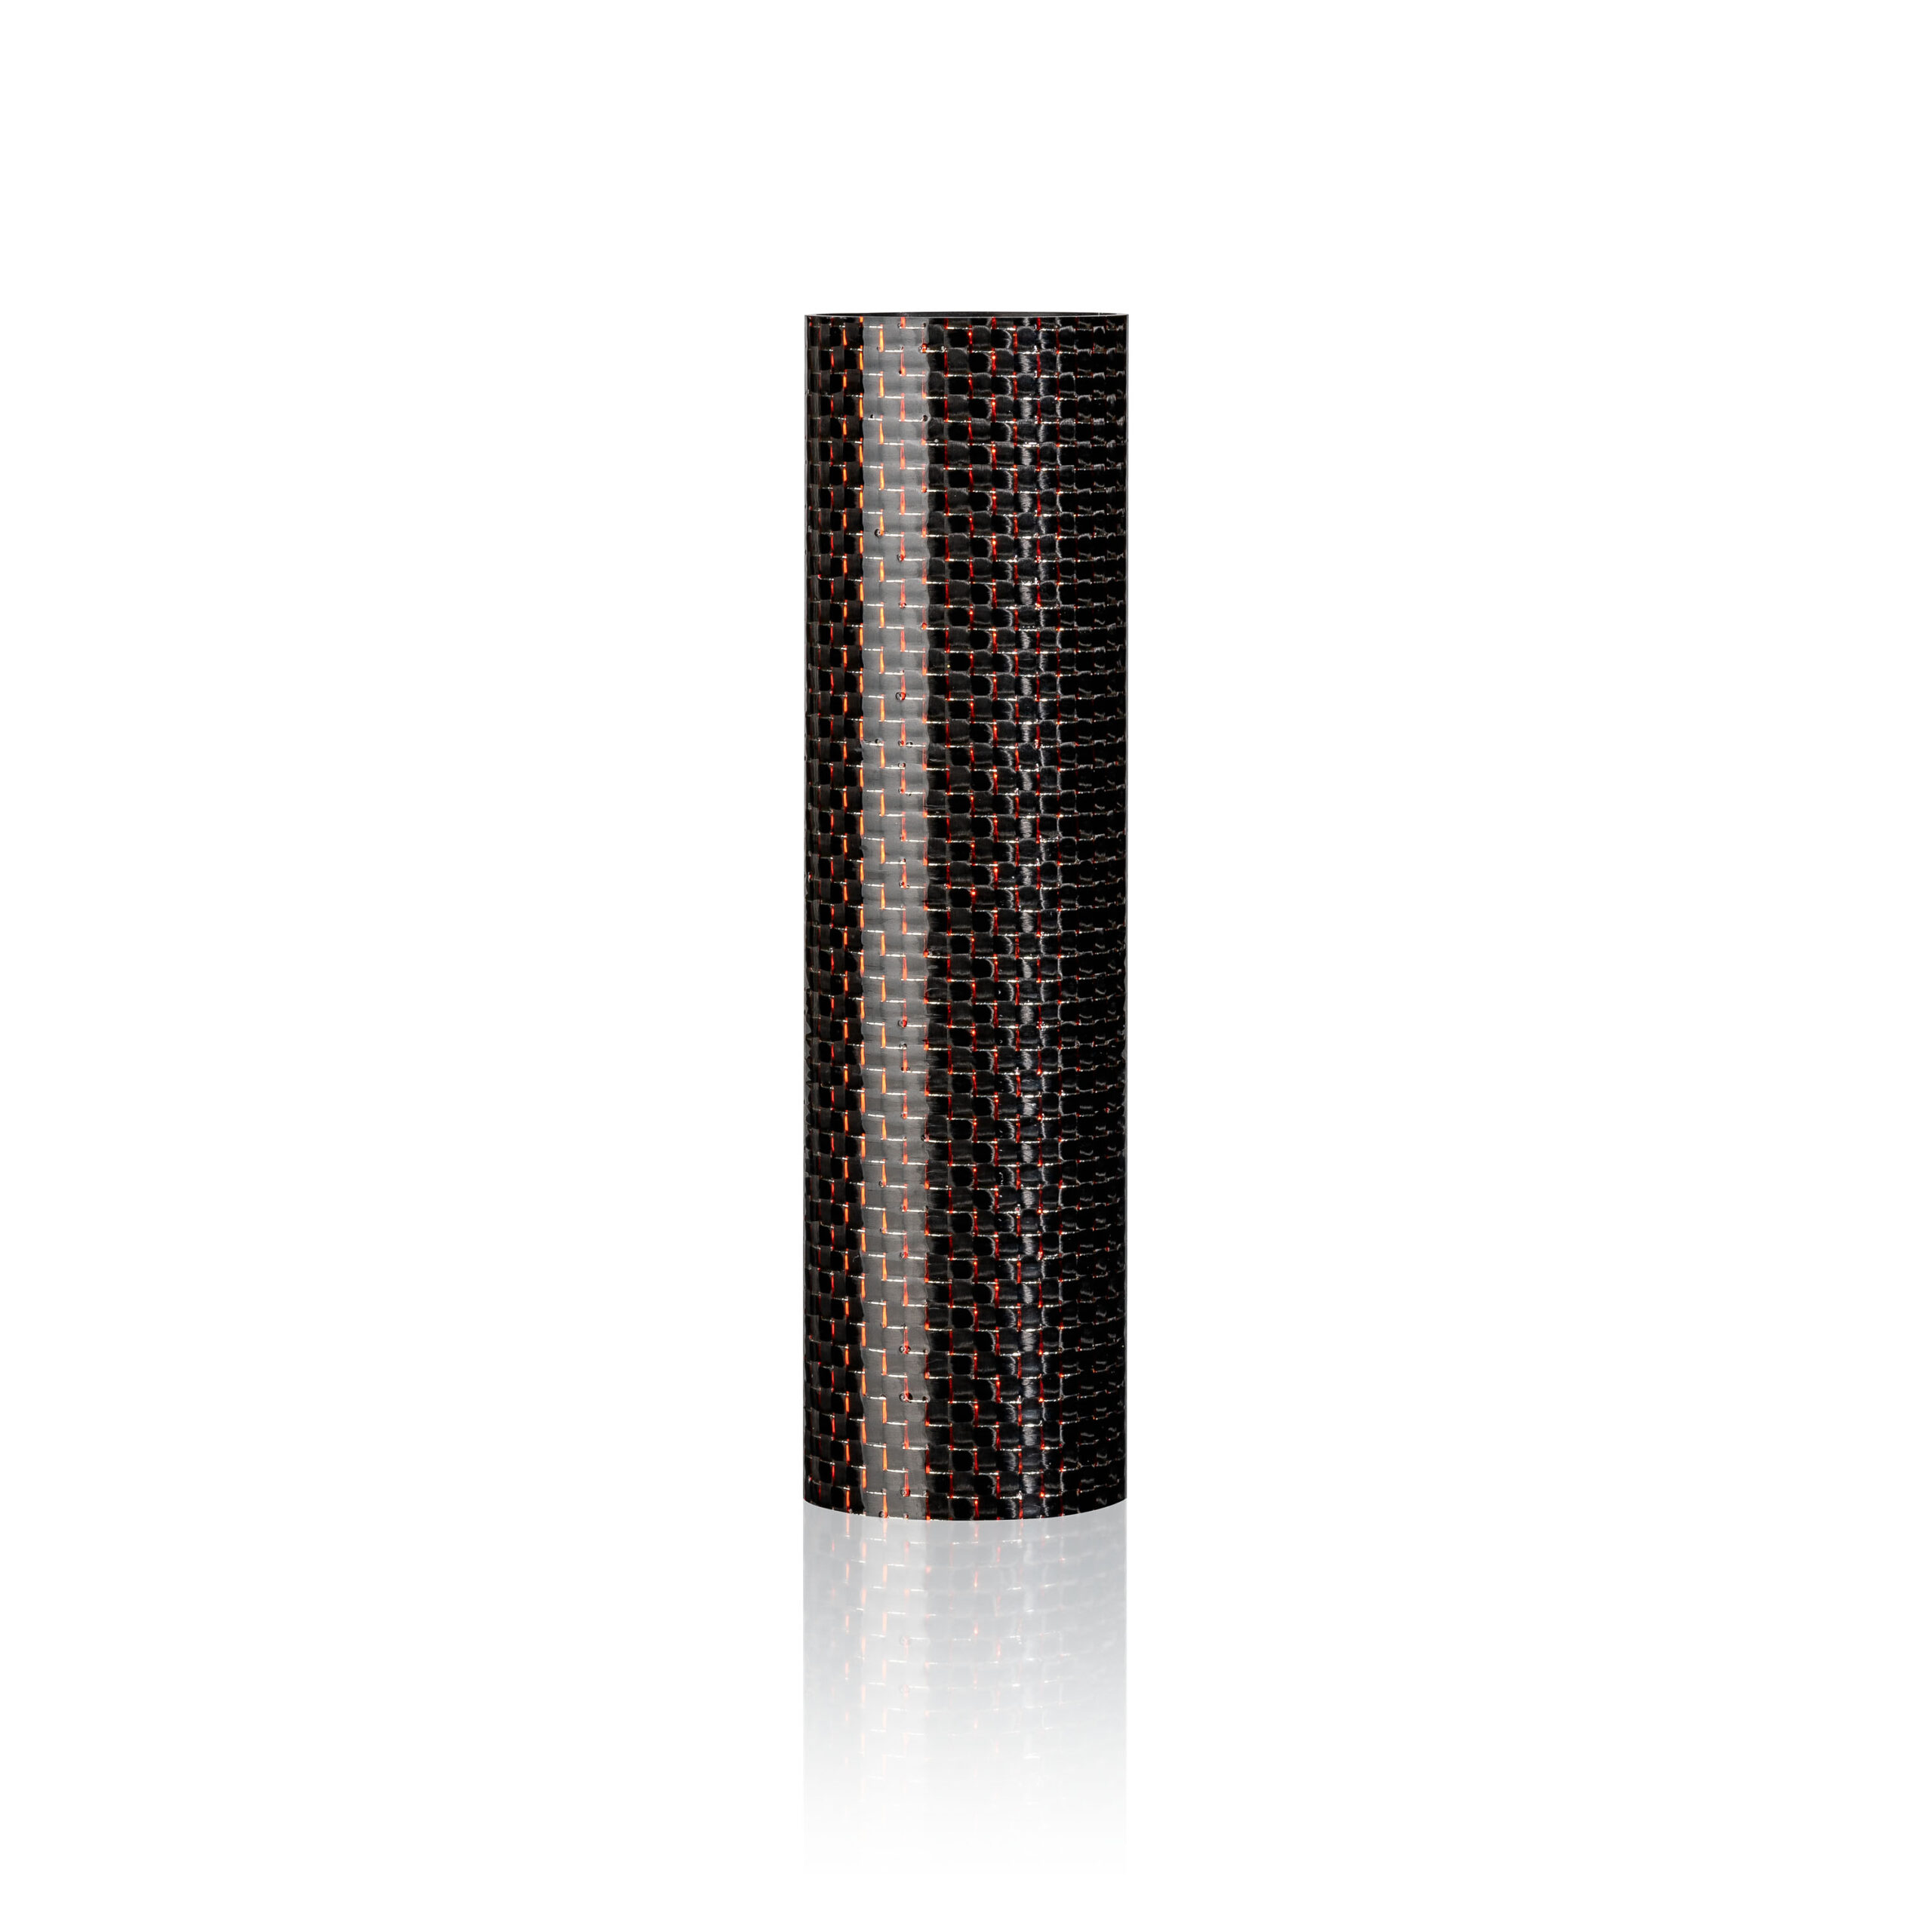 shisha sleeve for steamulation xpansion mini in carbon black red color